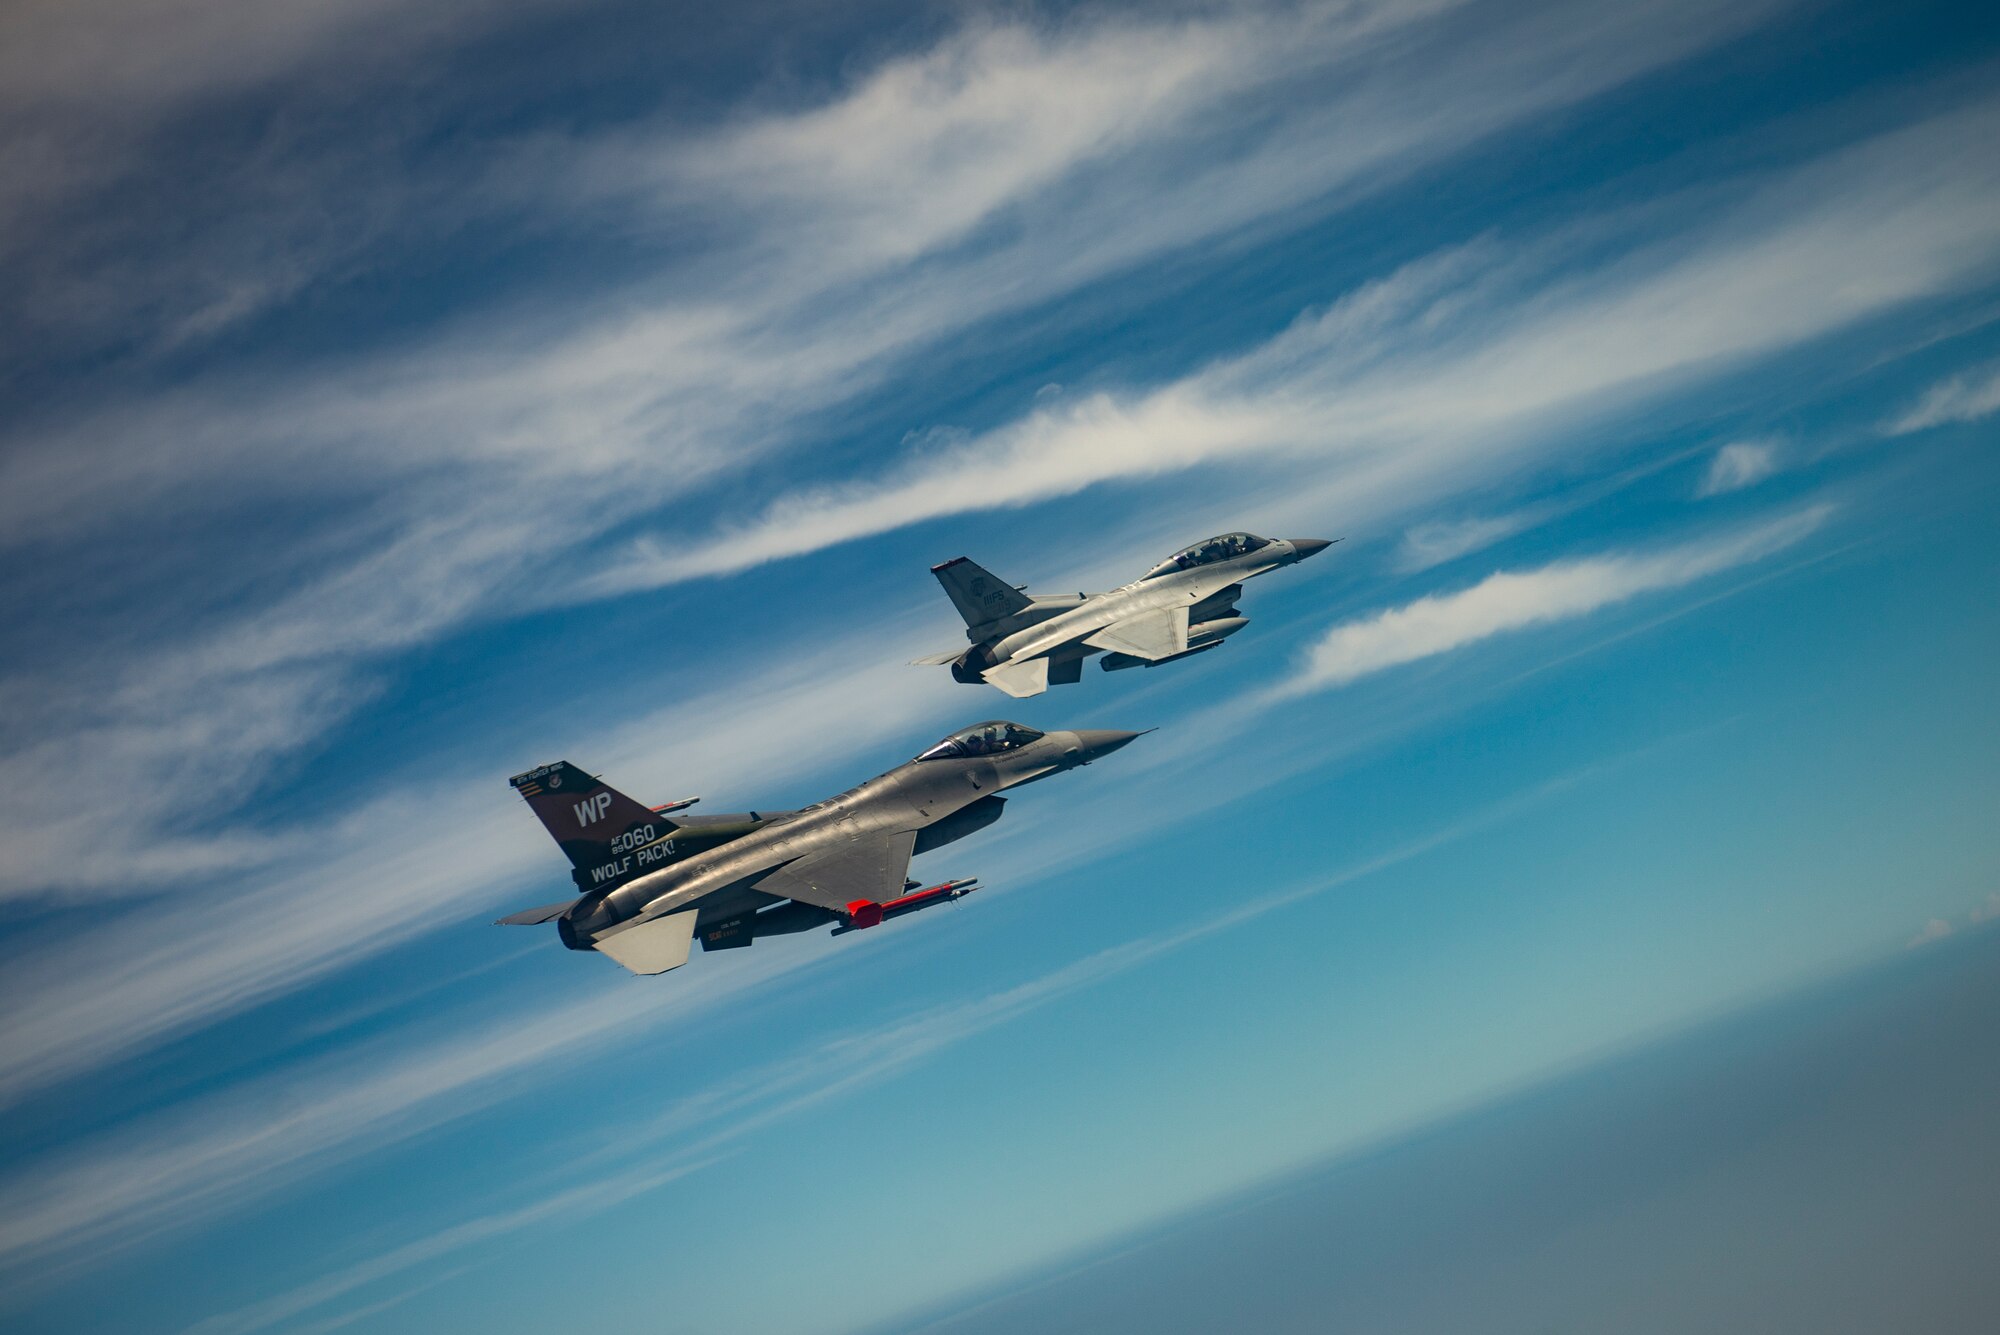 Two jets fly together.